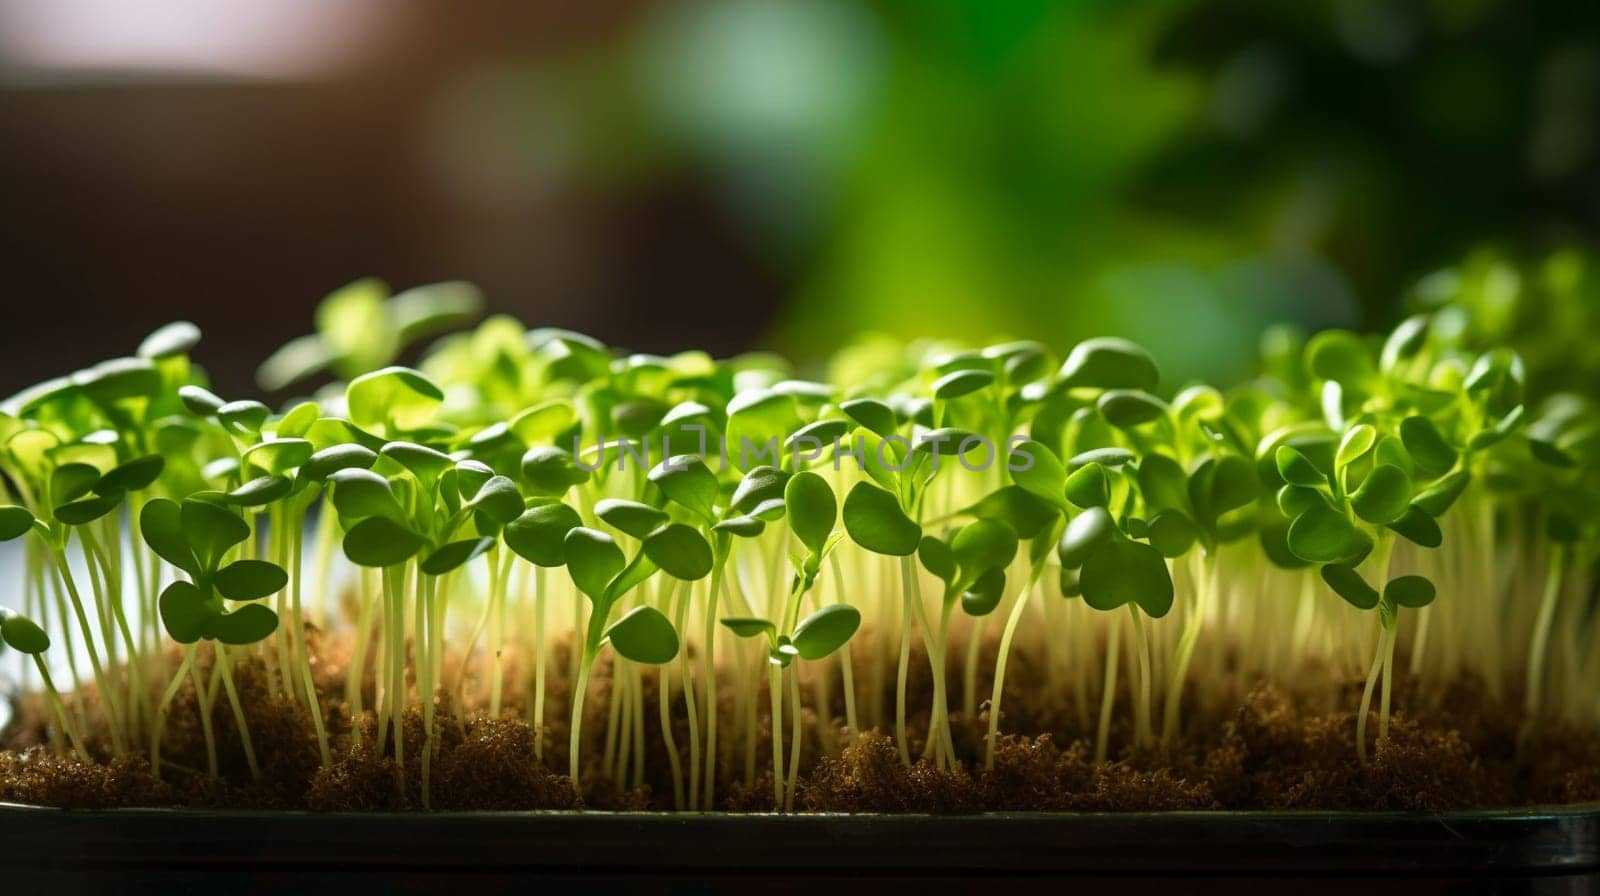 Young green sprouts grow in sunlit soil. High quality photo